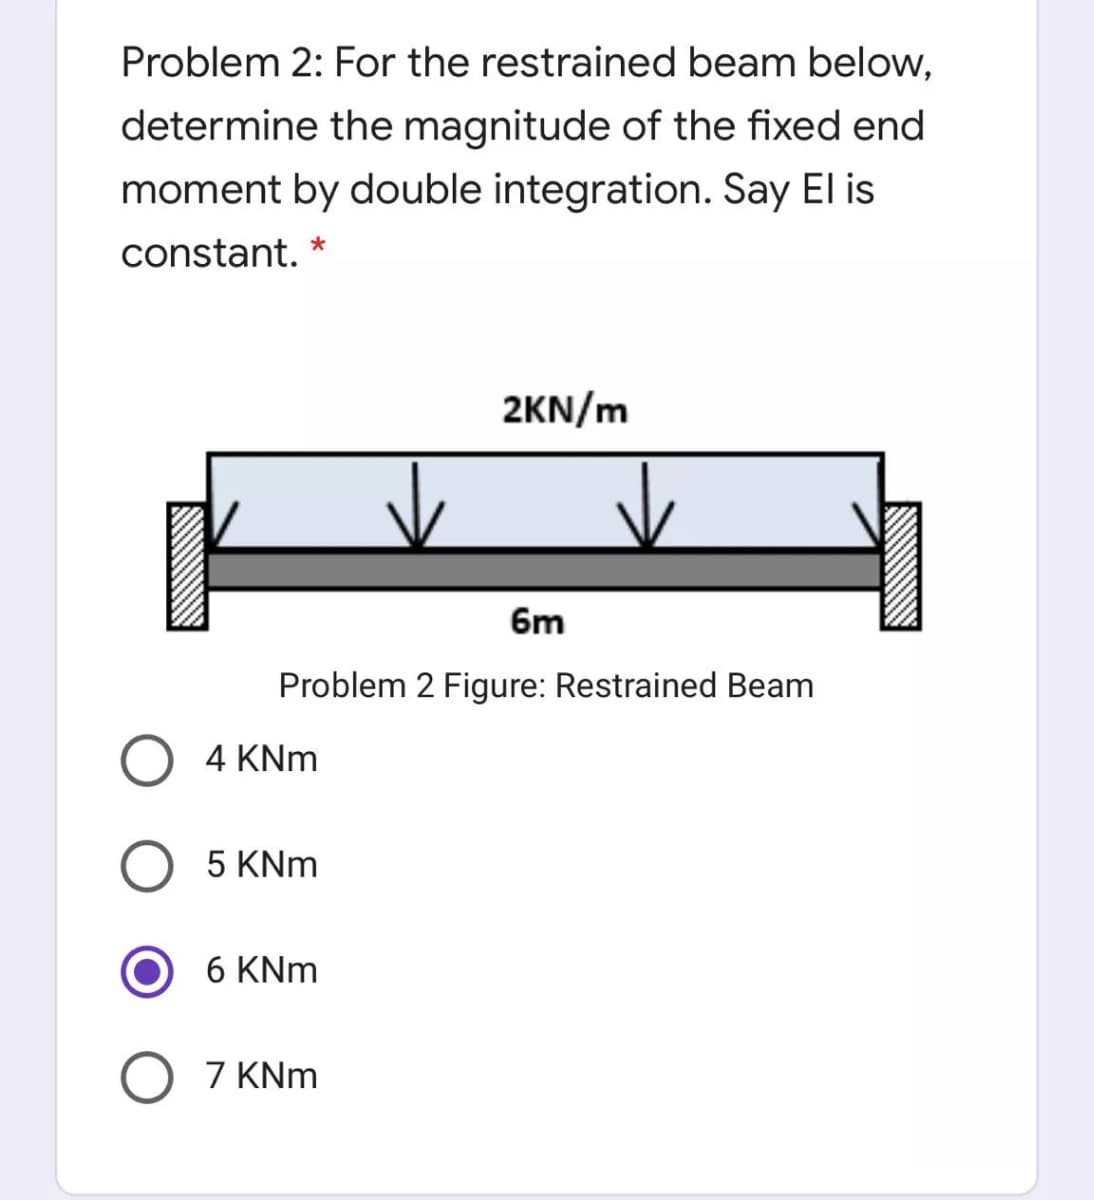 Problem 2: For the restrained beam below,
determine the magnitude of the fixed end
moment by double integration. Say El is
constant. *
2KN/m
6m
Problem 2 Figure: Restrained Beam
O 4 KNm
5 KNm
6 KNm
O 7 KNm
